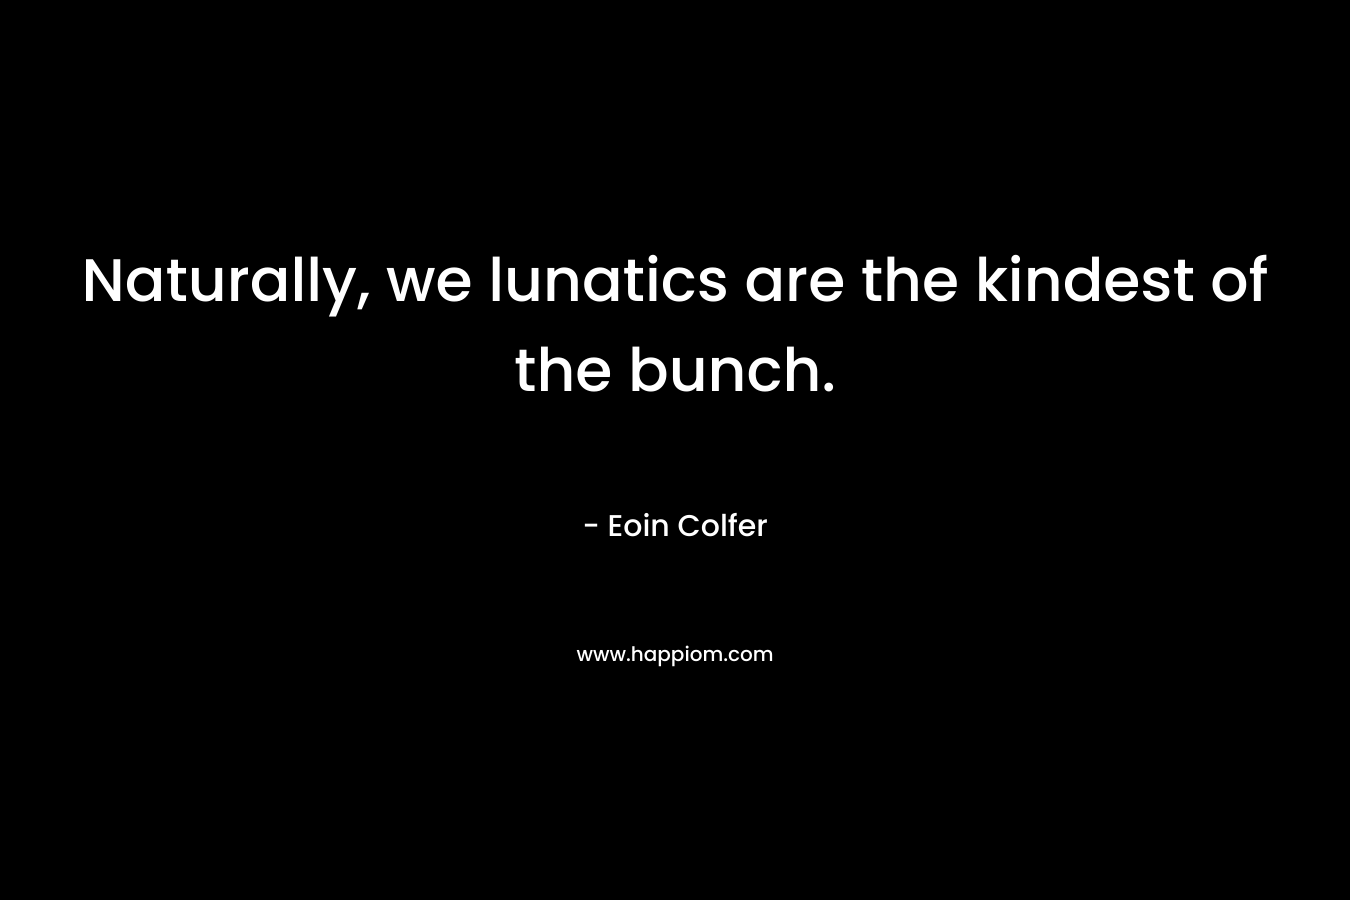 Naturally, we lunatics are the kindest of the bunch.